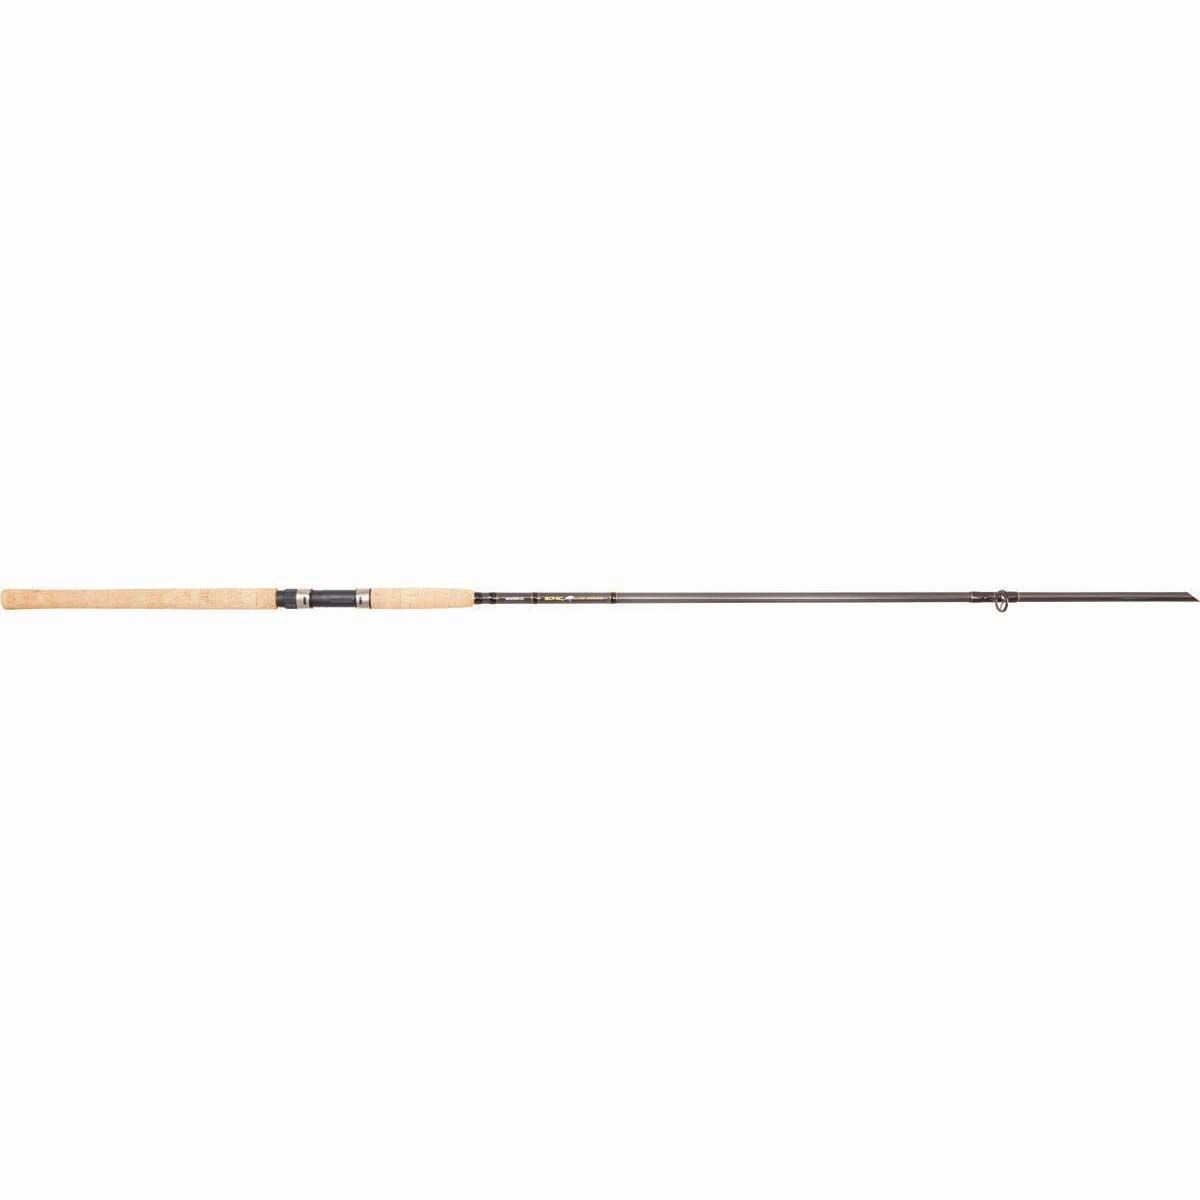 Cheap Shimano Sonic Lure Spinning Rod 7ft 2-4kg 7ft 2-4kg with